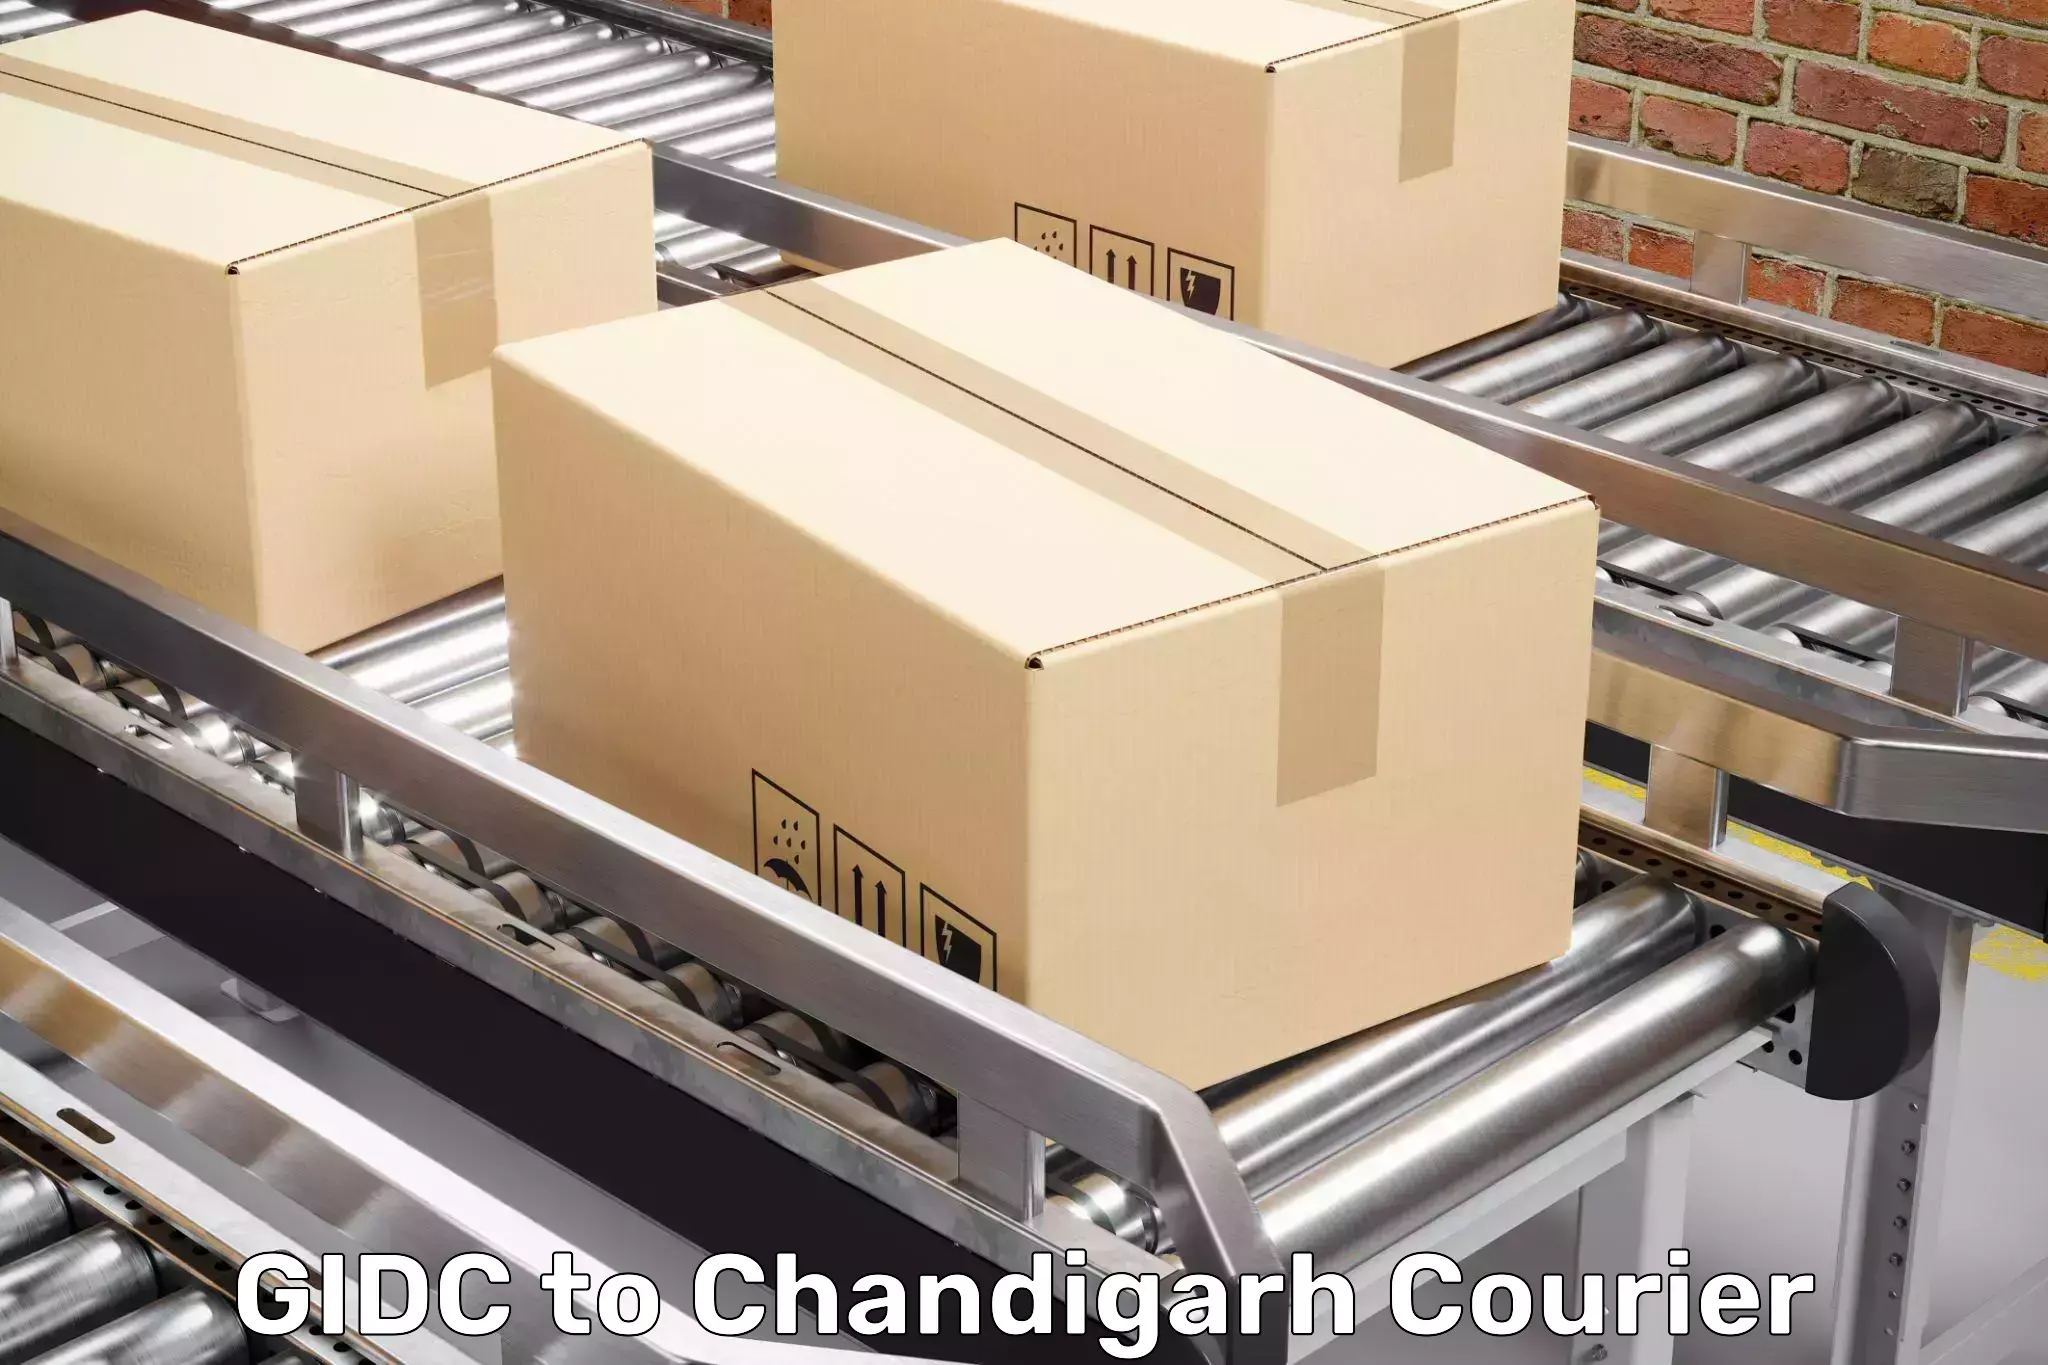 Budget-friendly movers GIDC to Chandigarh